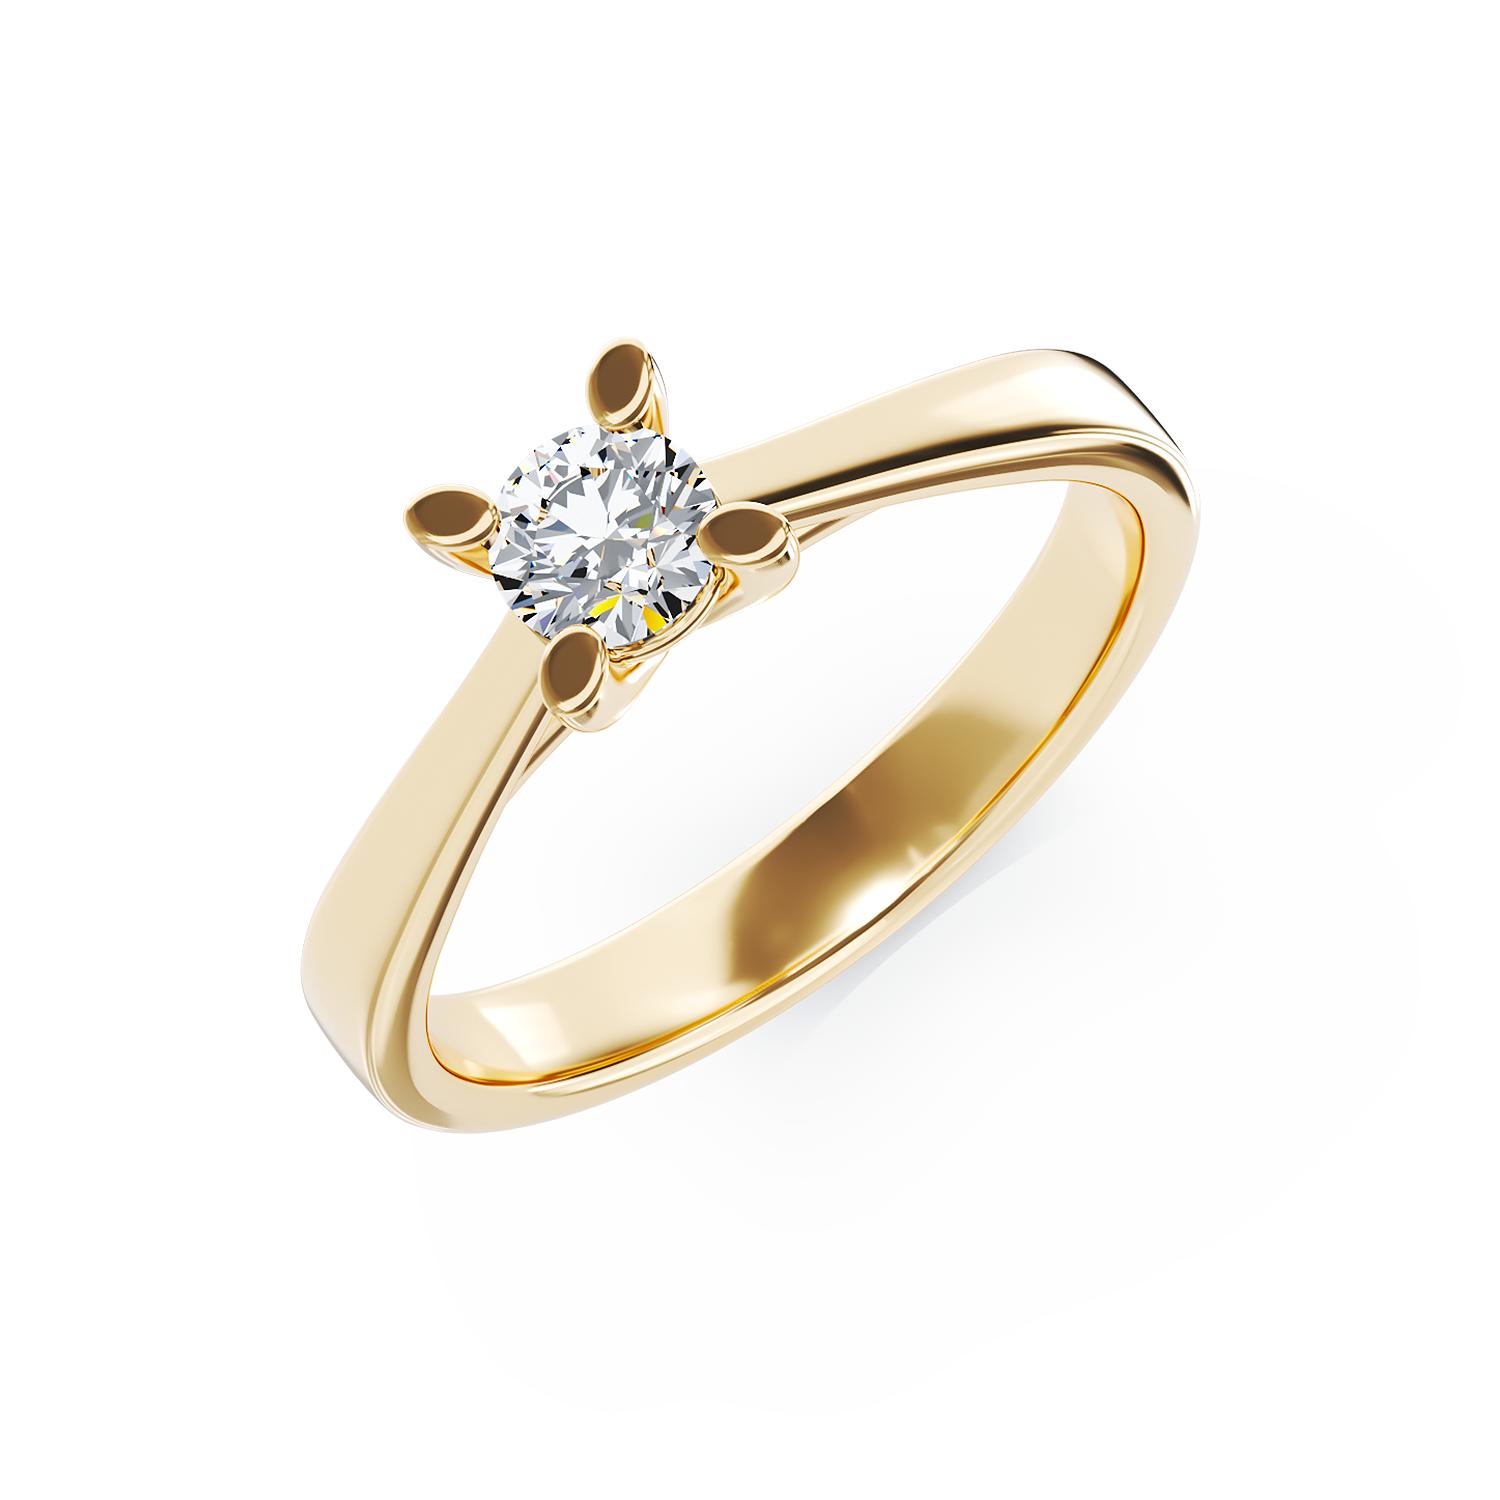 14K yellow gold engagement ring with a 0.15ct solitaire diamond